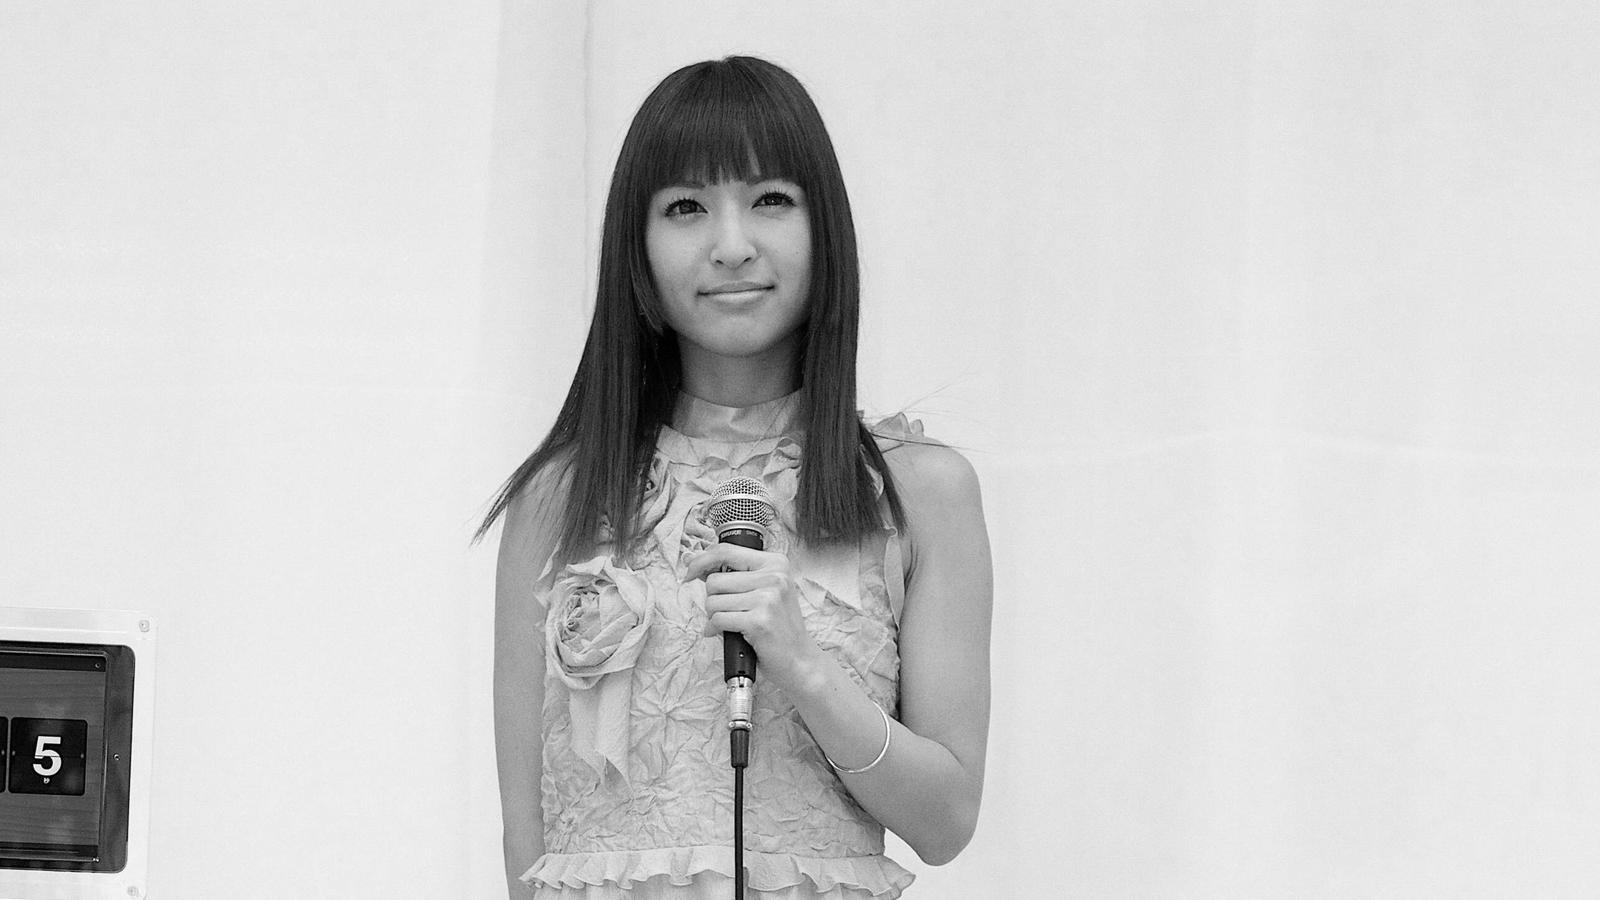 Sayaka Kanda, September 19, 2014, Tokyo, Japan : Japanese actress and singer Sayaka Kanda speaks during the event launching Apple s new smartphone iPhone 6 and iPhone 6 Plus at the SoftBank store in Omotesando on September 19, 2014. The new iPhone 6 